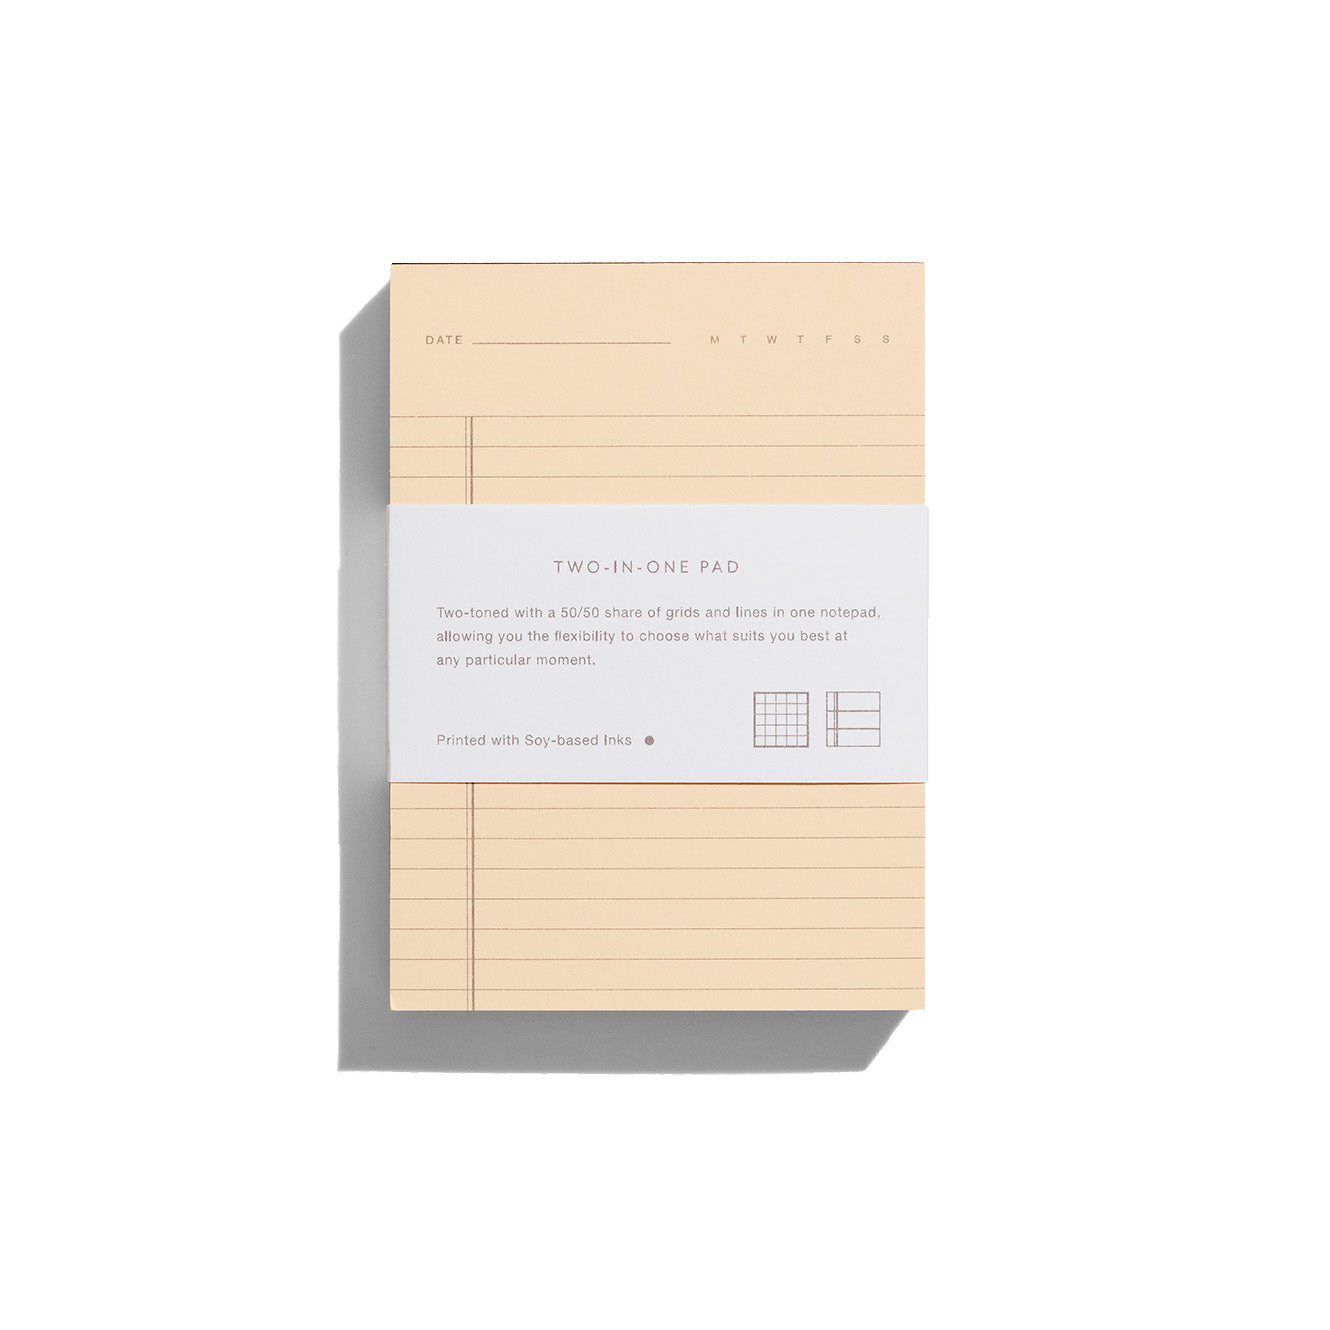 2-in-1 Notepad in Brown and Cream by Before Breakfast. Grid and ruled sheets. Made in England and fountain pen friendly.